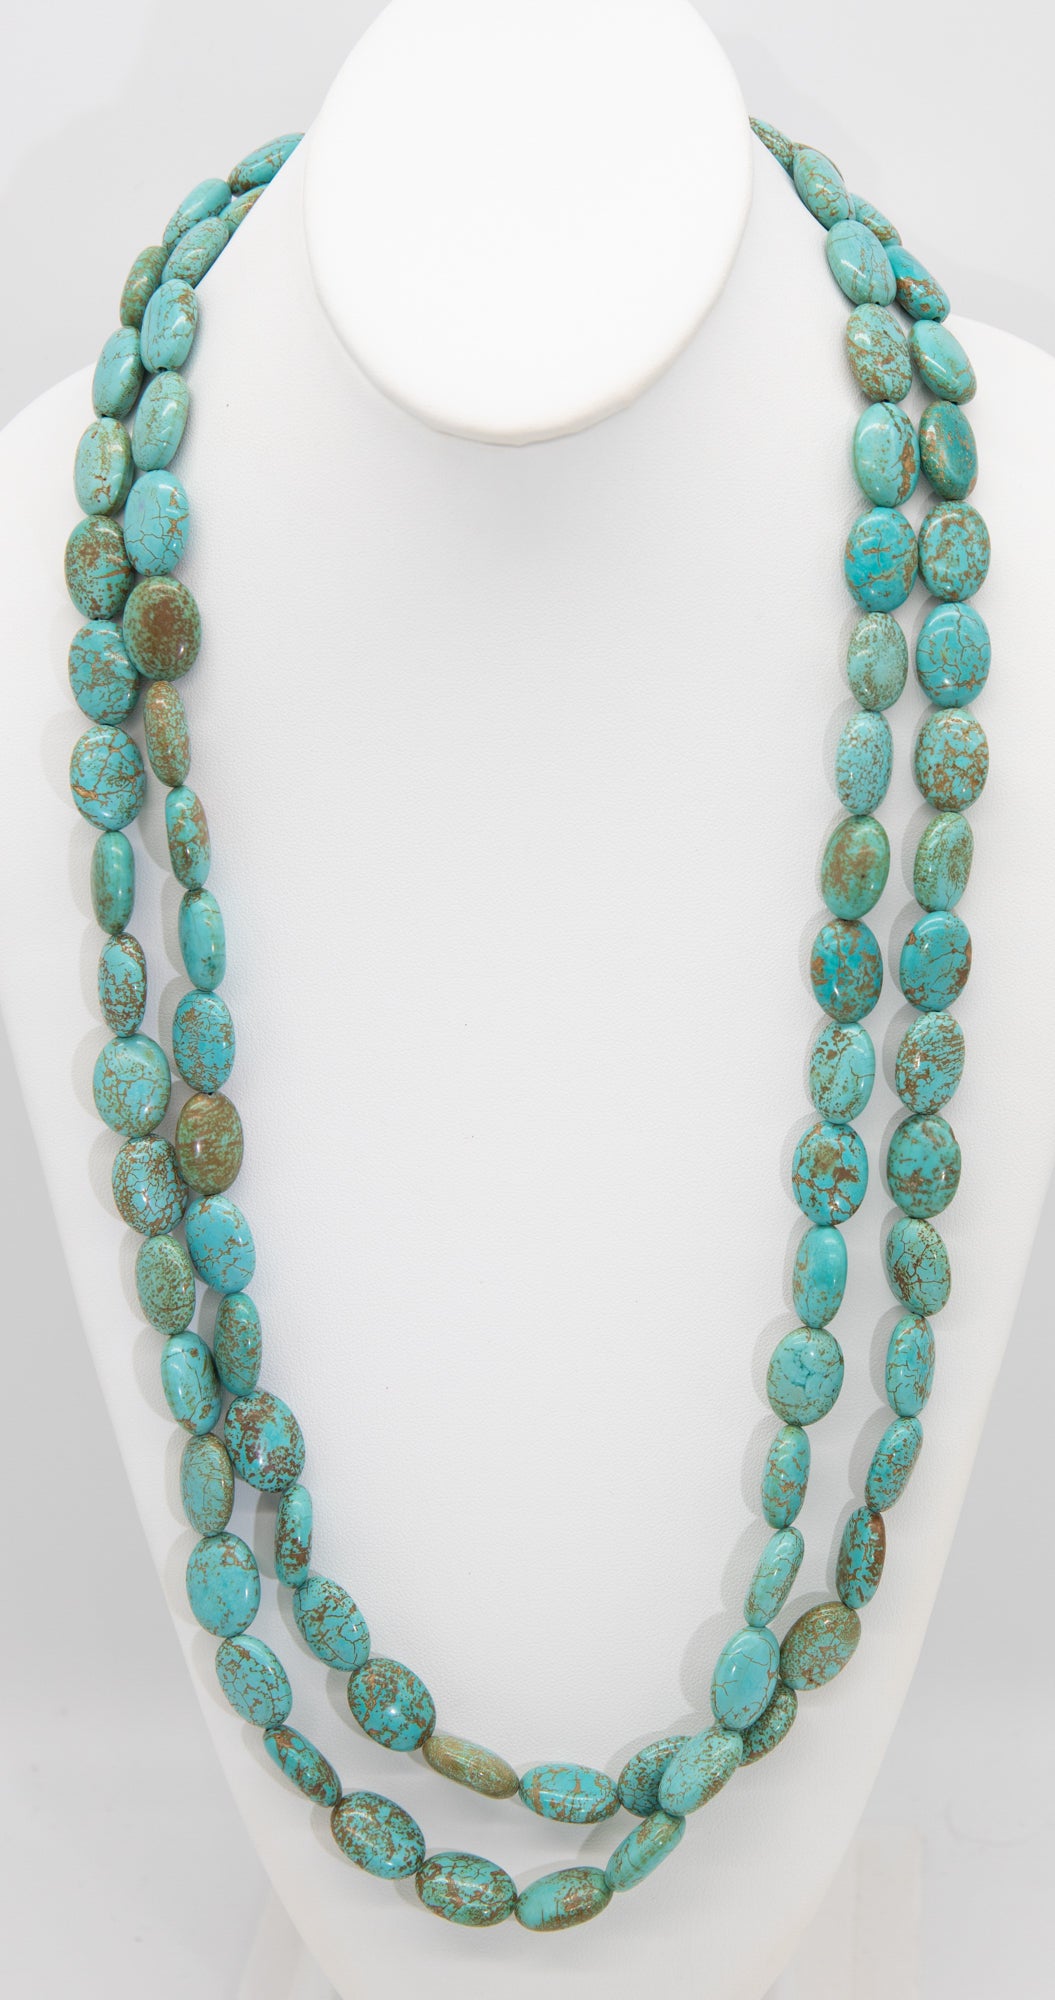 Vintage Turquoise Long Necklace - JD10734